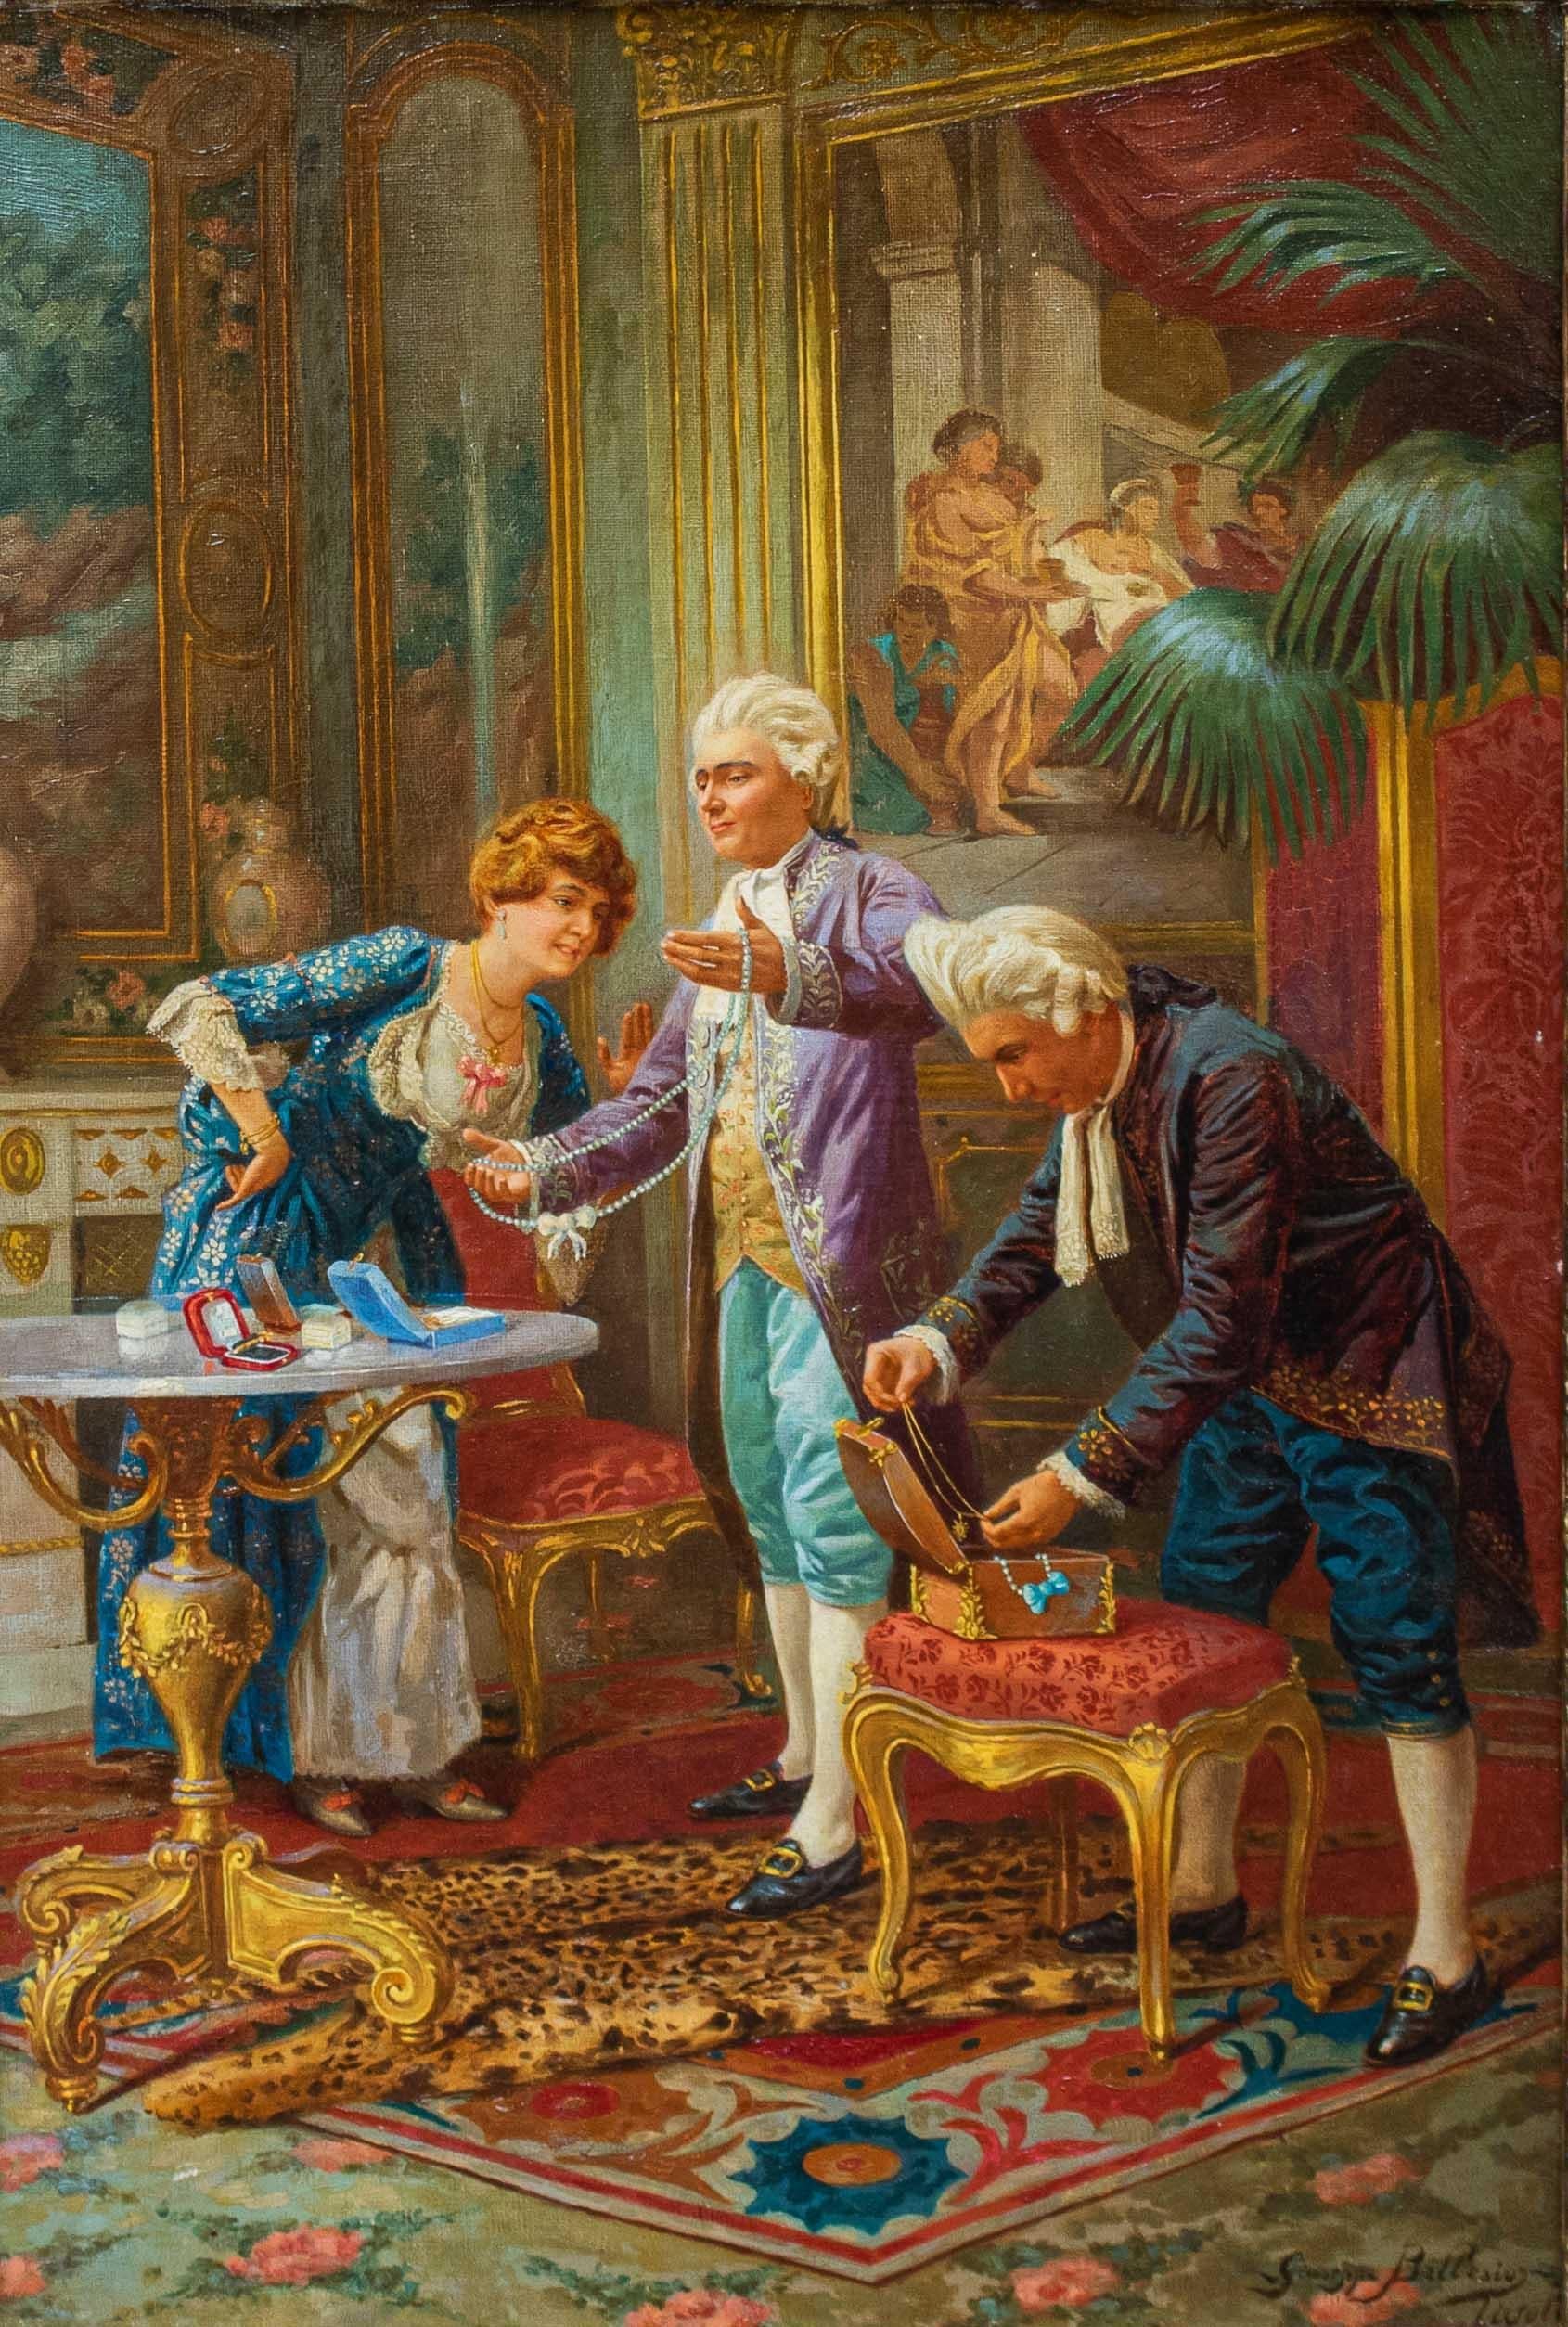 Giuseppe Ballesio (Rome, 1860 - 1923)
The pearl necklace
Oil on canvas, 61.5 x 41 cm
Signed lower right: Giuseppe Ballesio / Tivoli

The painting in question depicts a scene set in a luxurious eighteenth-century interior whose protagonists are